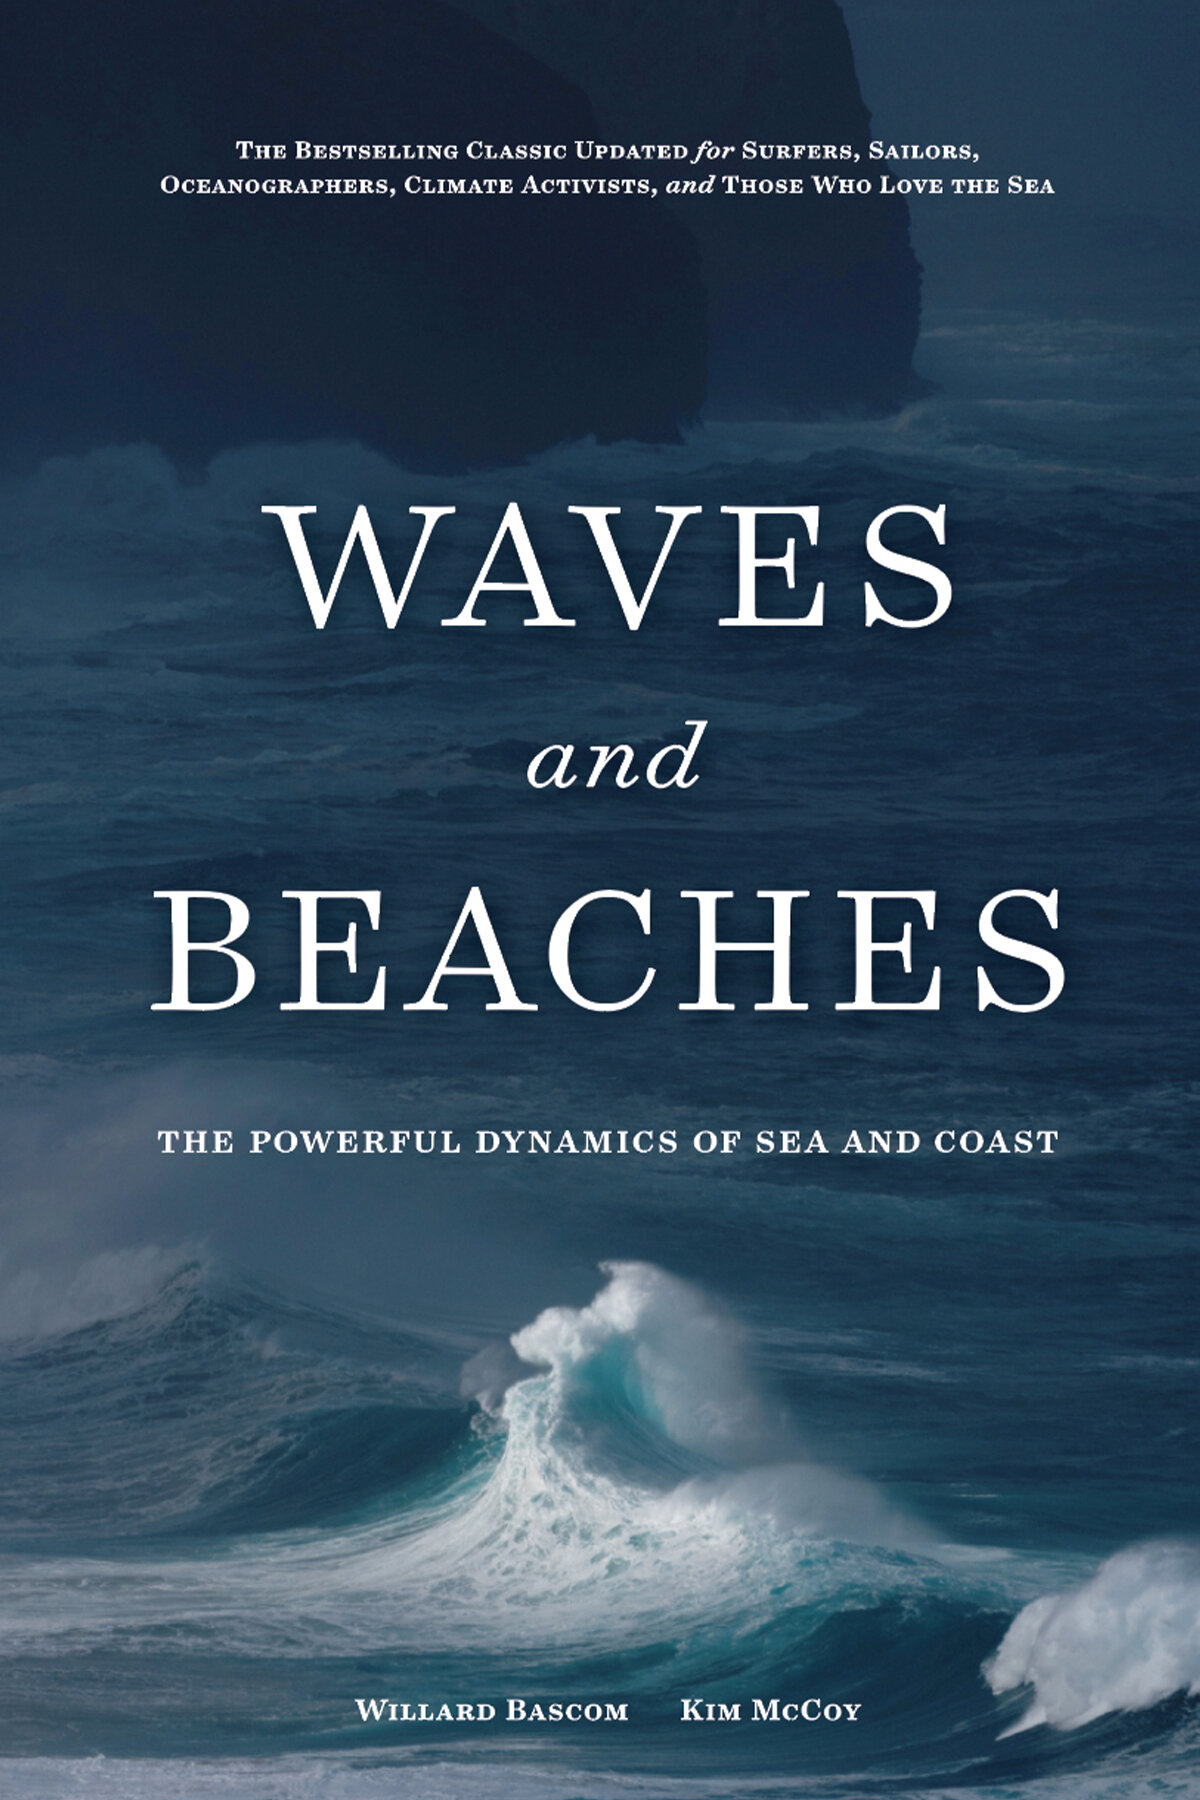 Waves and Beaches: The Powerful Dynamics of Sea and Coast by Willard Bascom and Kim McCoy